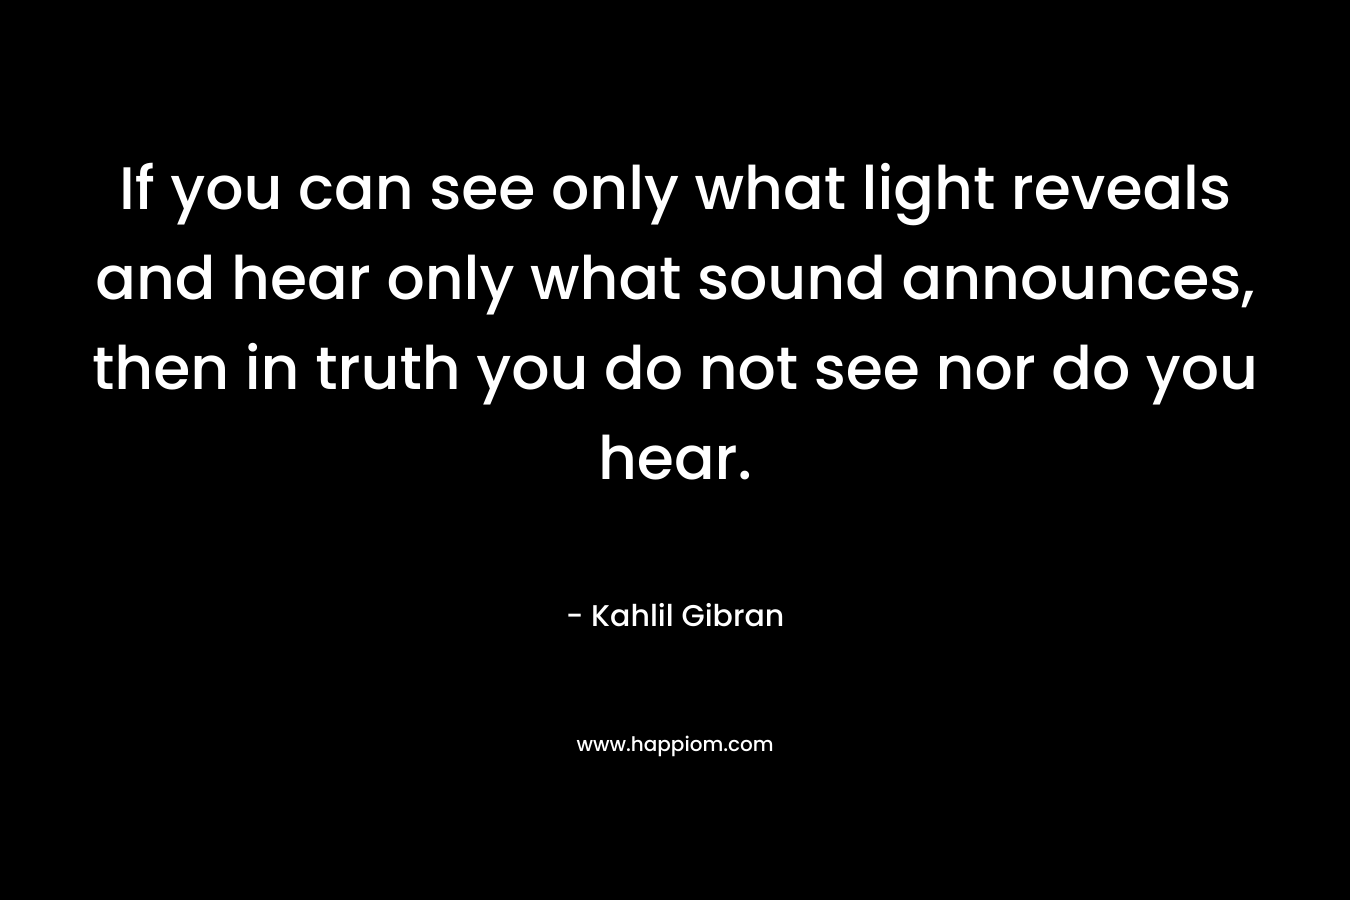 If you can see only what light reveals and hear only what sound announces, then in truth you do not see nor do you hear.